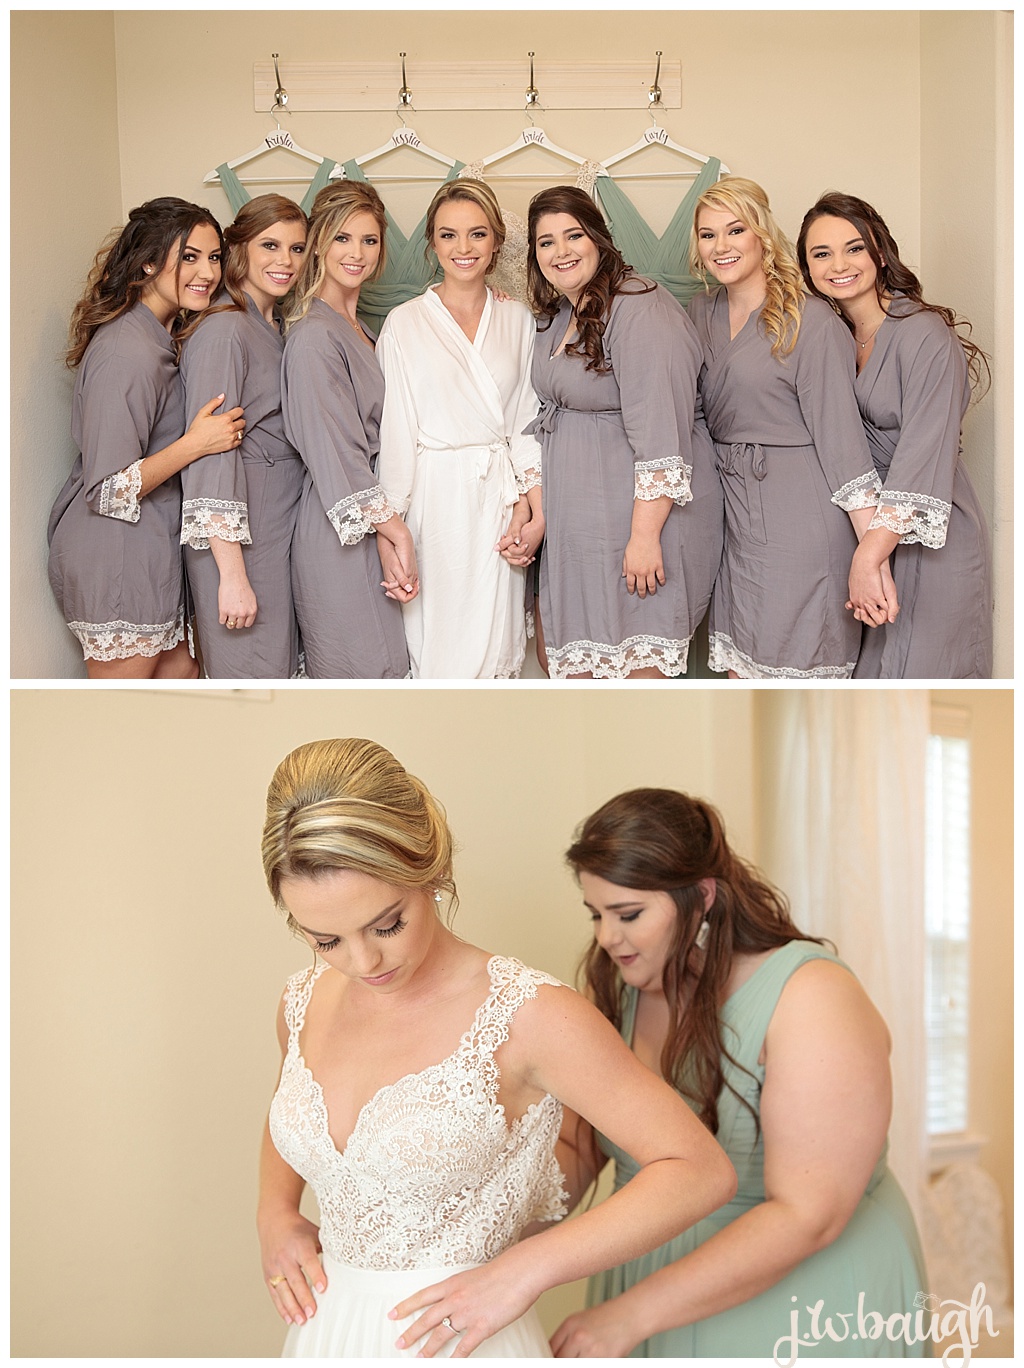 Bridesmaid Robes and Bride Getting Ready